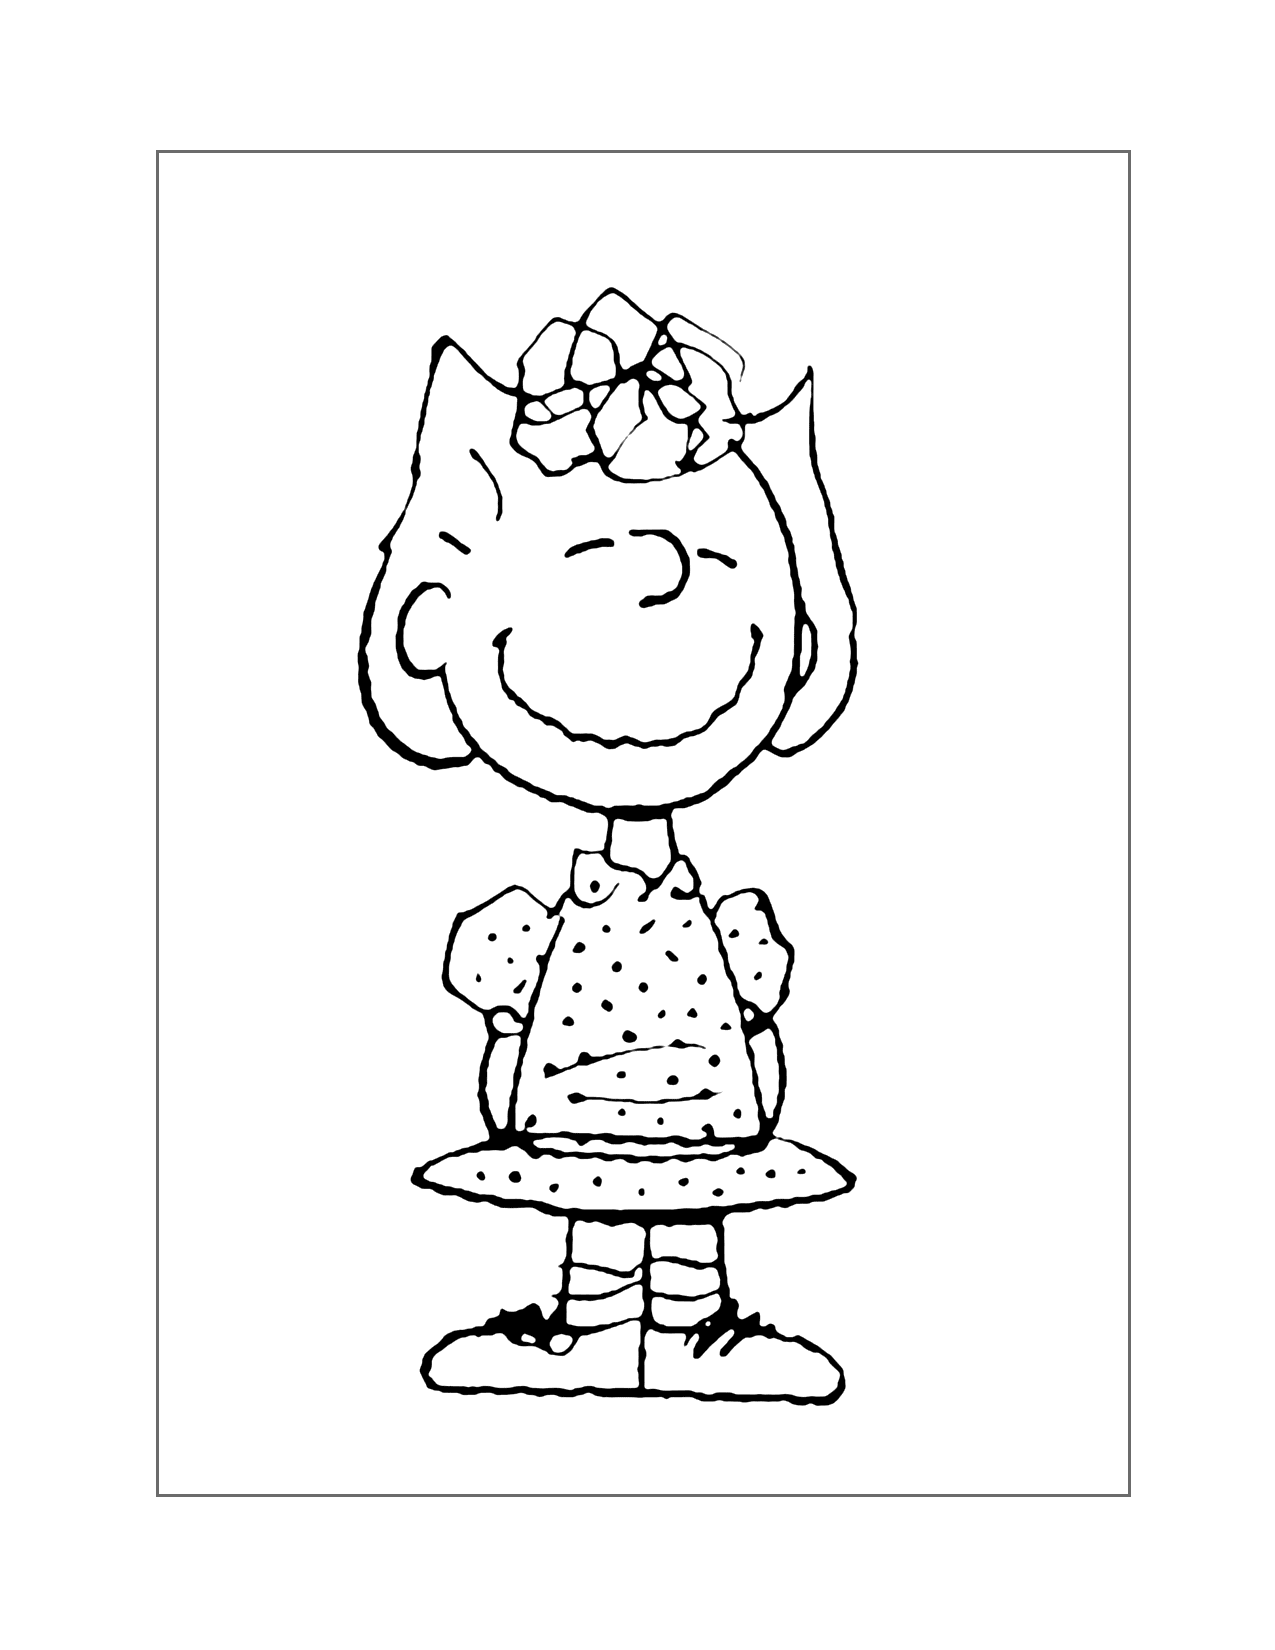 Charlie Browns Sister Sally Coloring Page